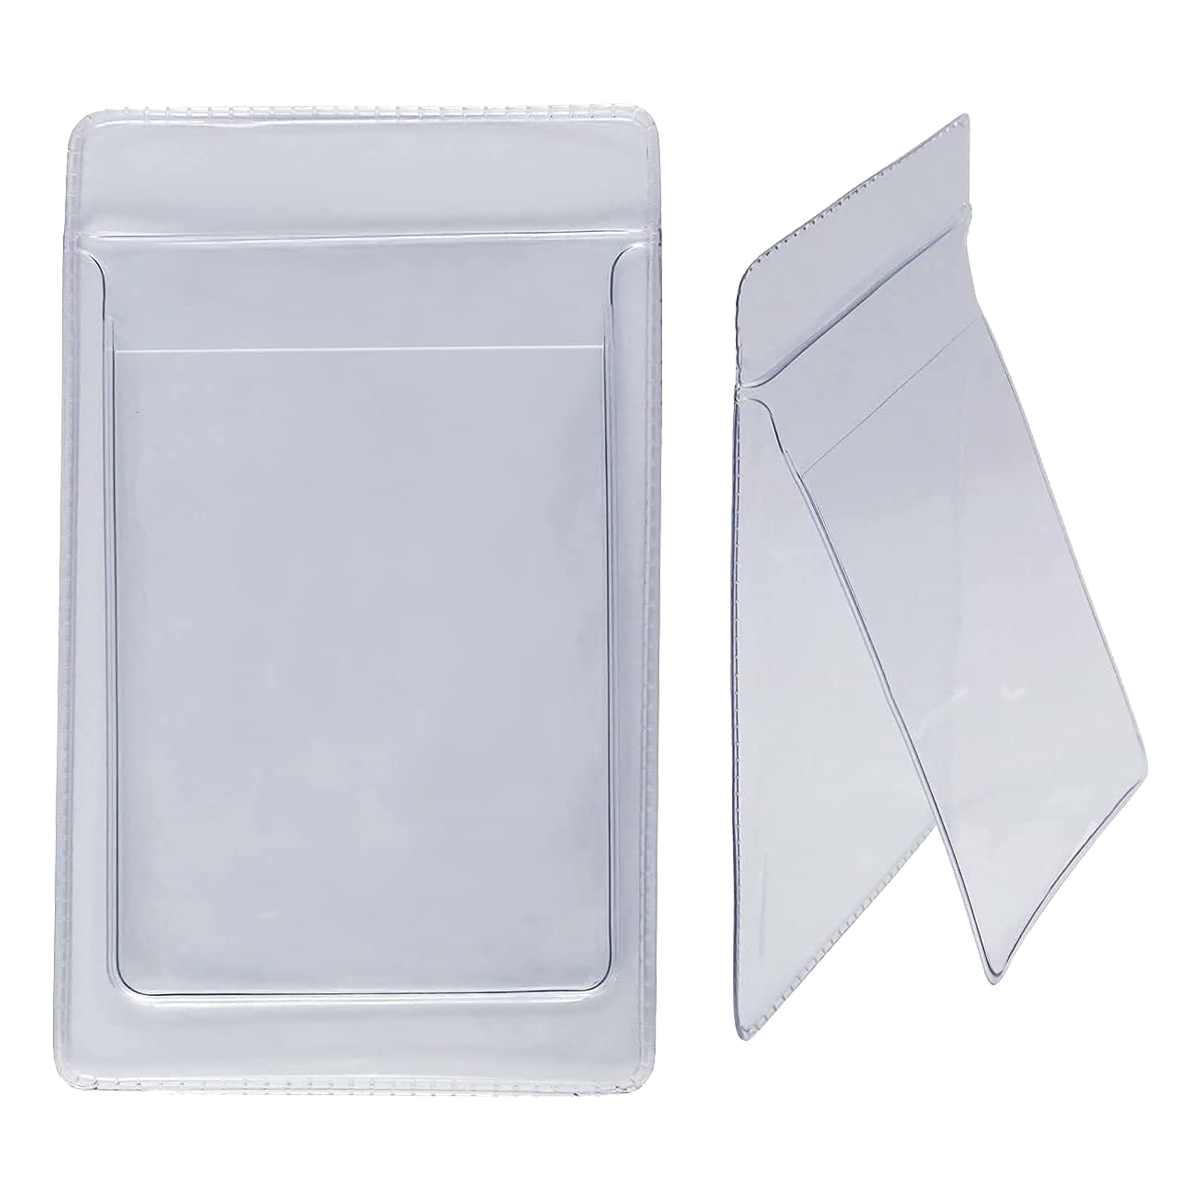 Premium Clear Plastic Vinyl Fabric PVC Protector For Multiple Uses - Sold  Folded